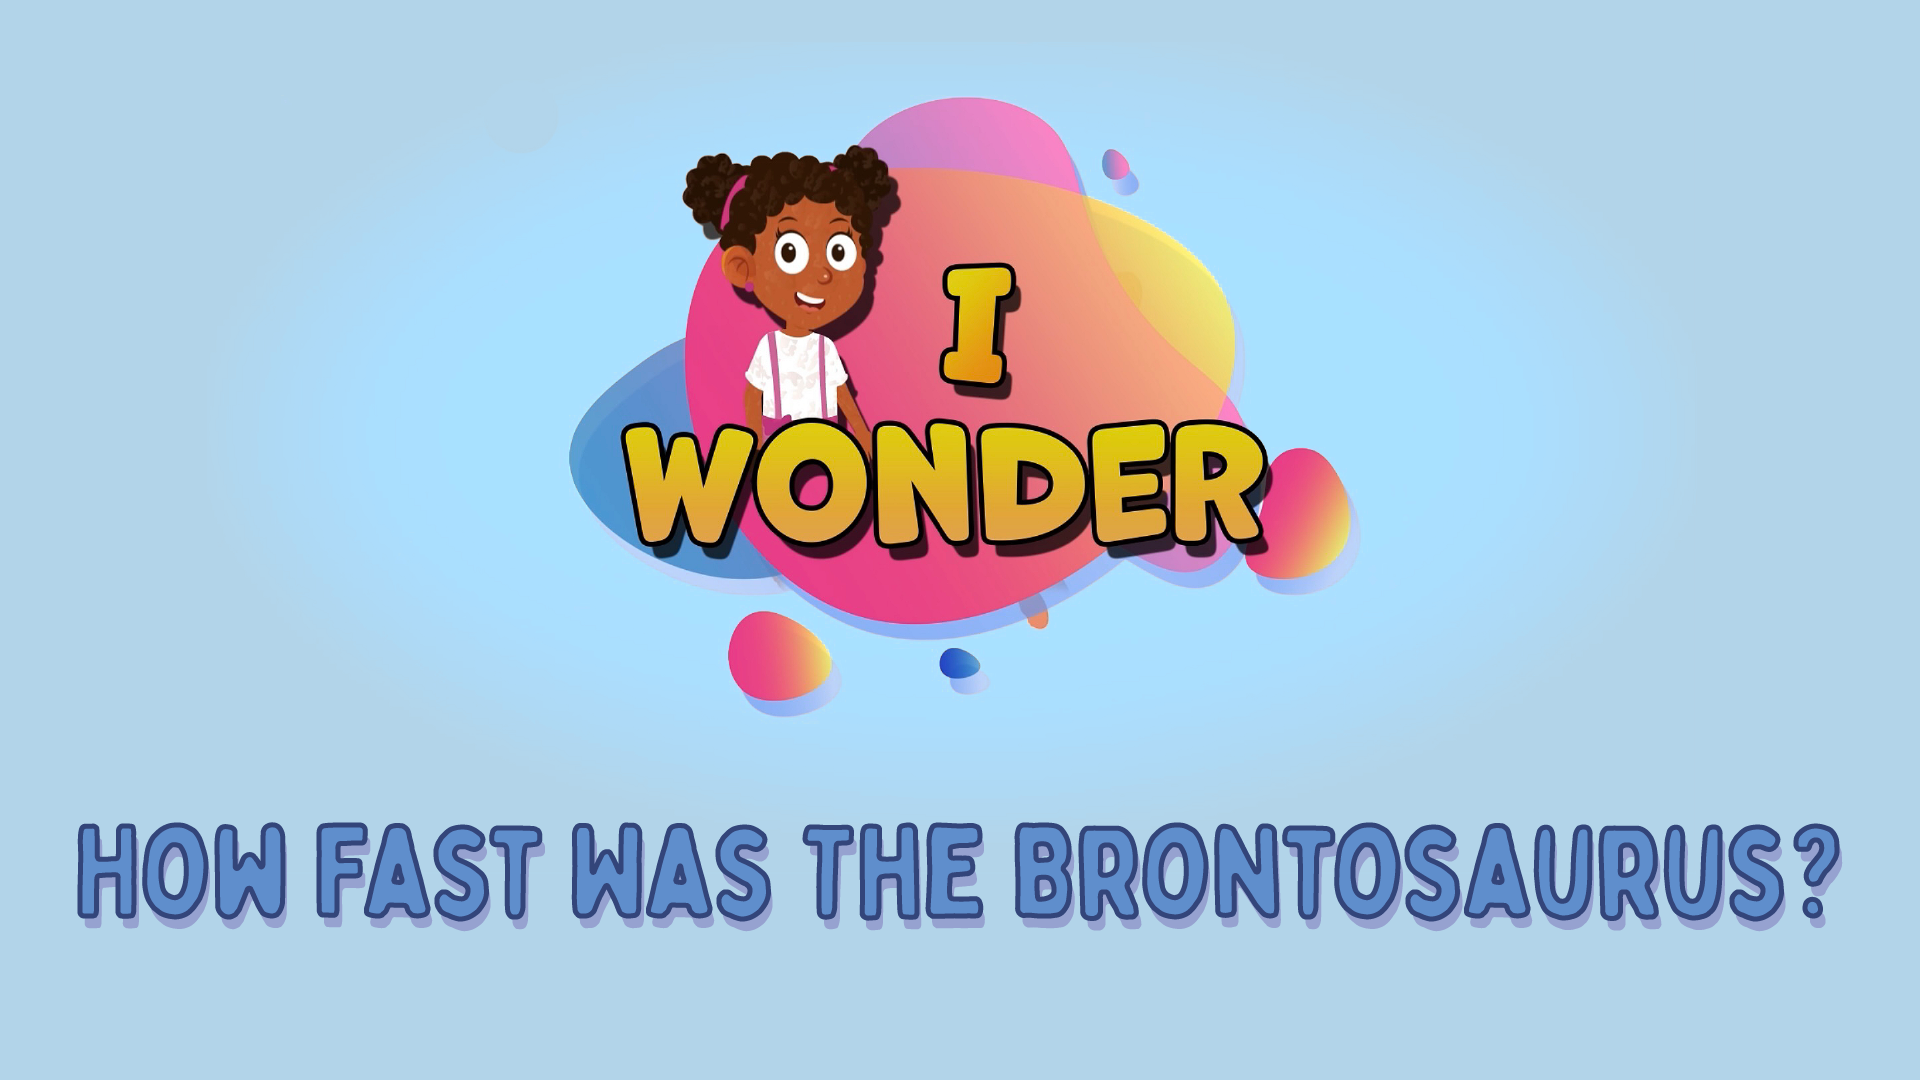 How Fast Was The Brontosaurus?